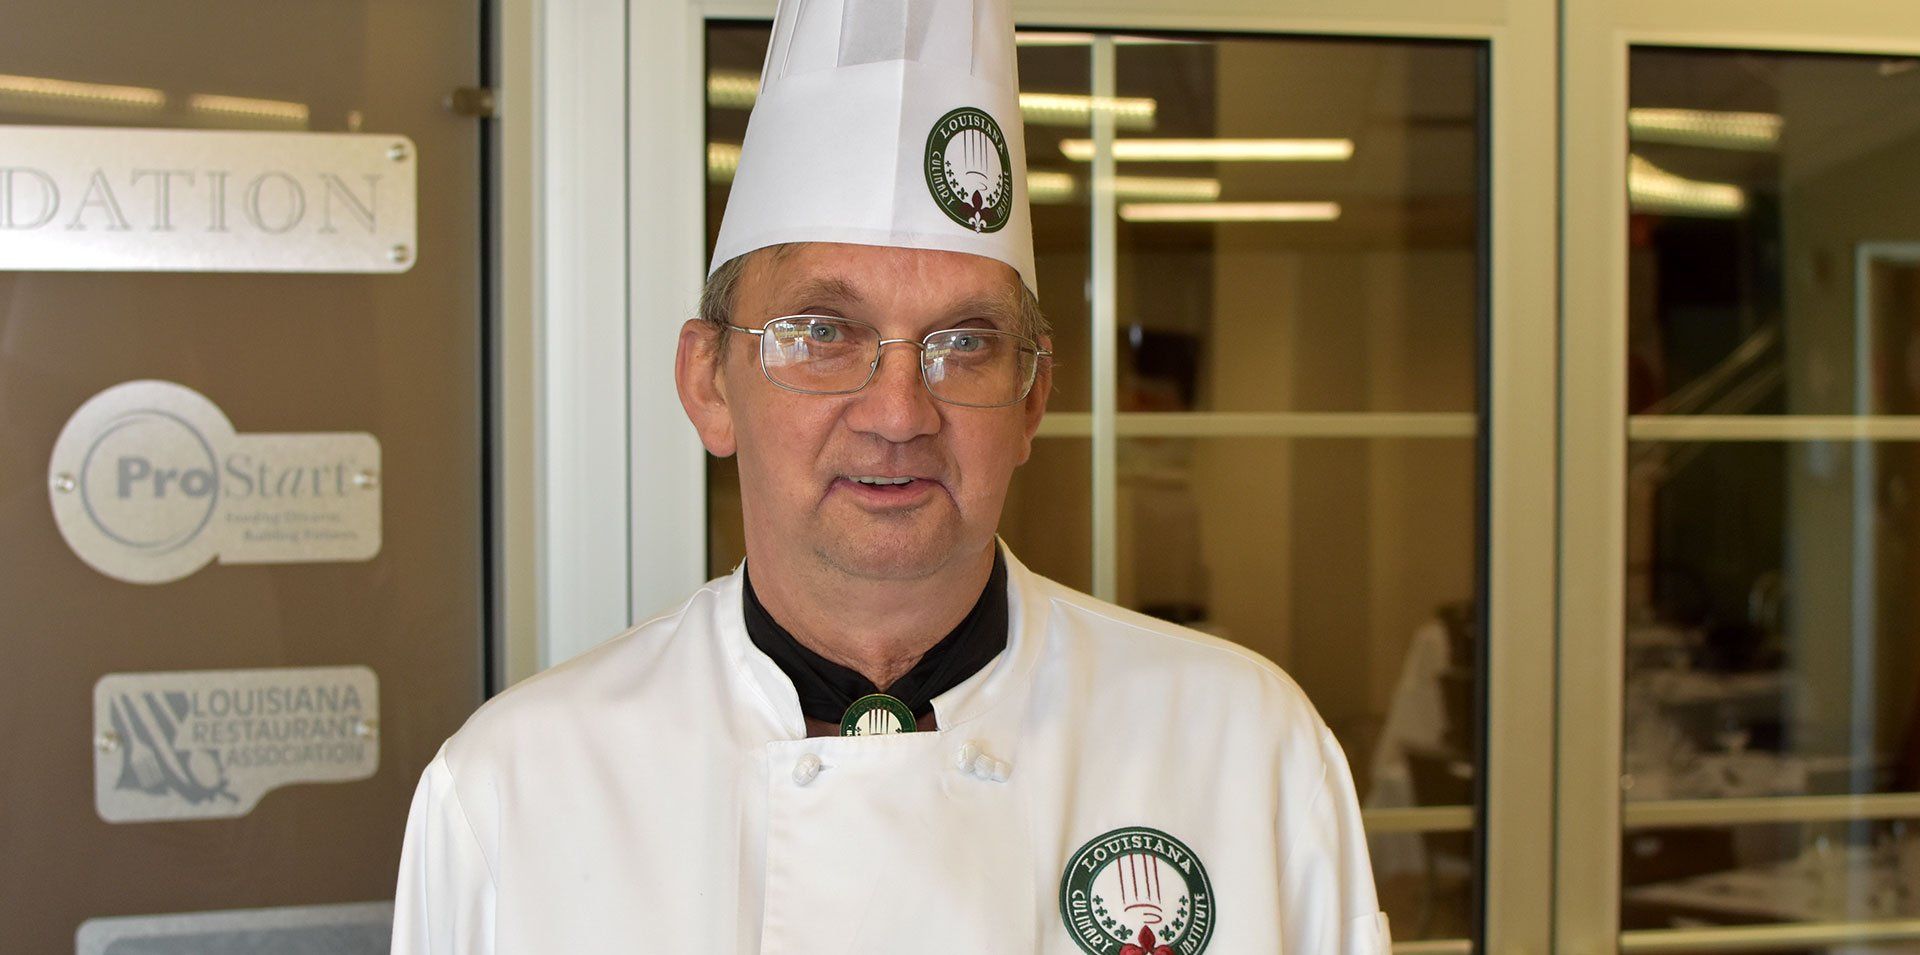 Chef George Michael Dunn Chef Instructor at Louisiana Culinary Institute